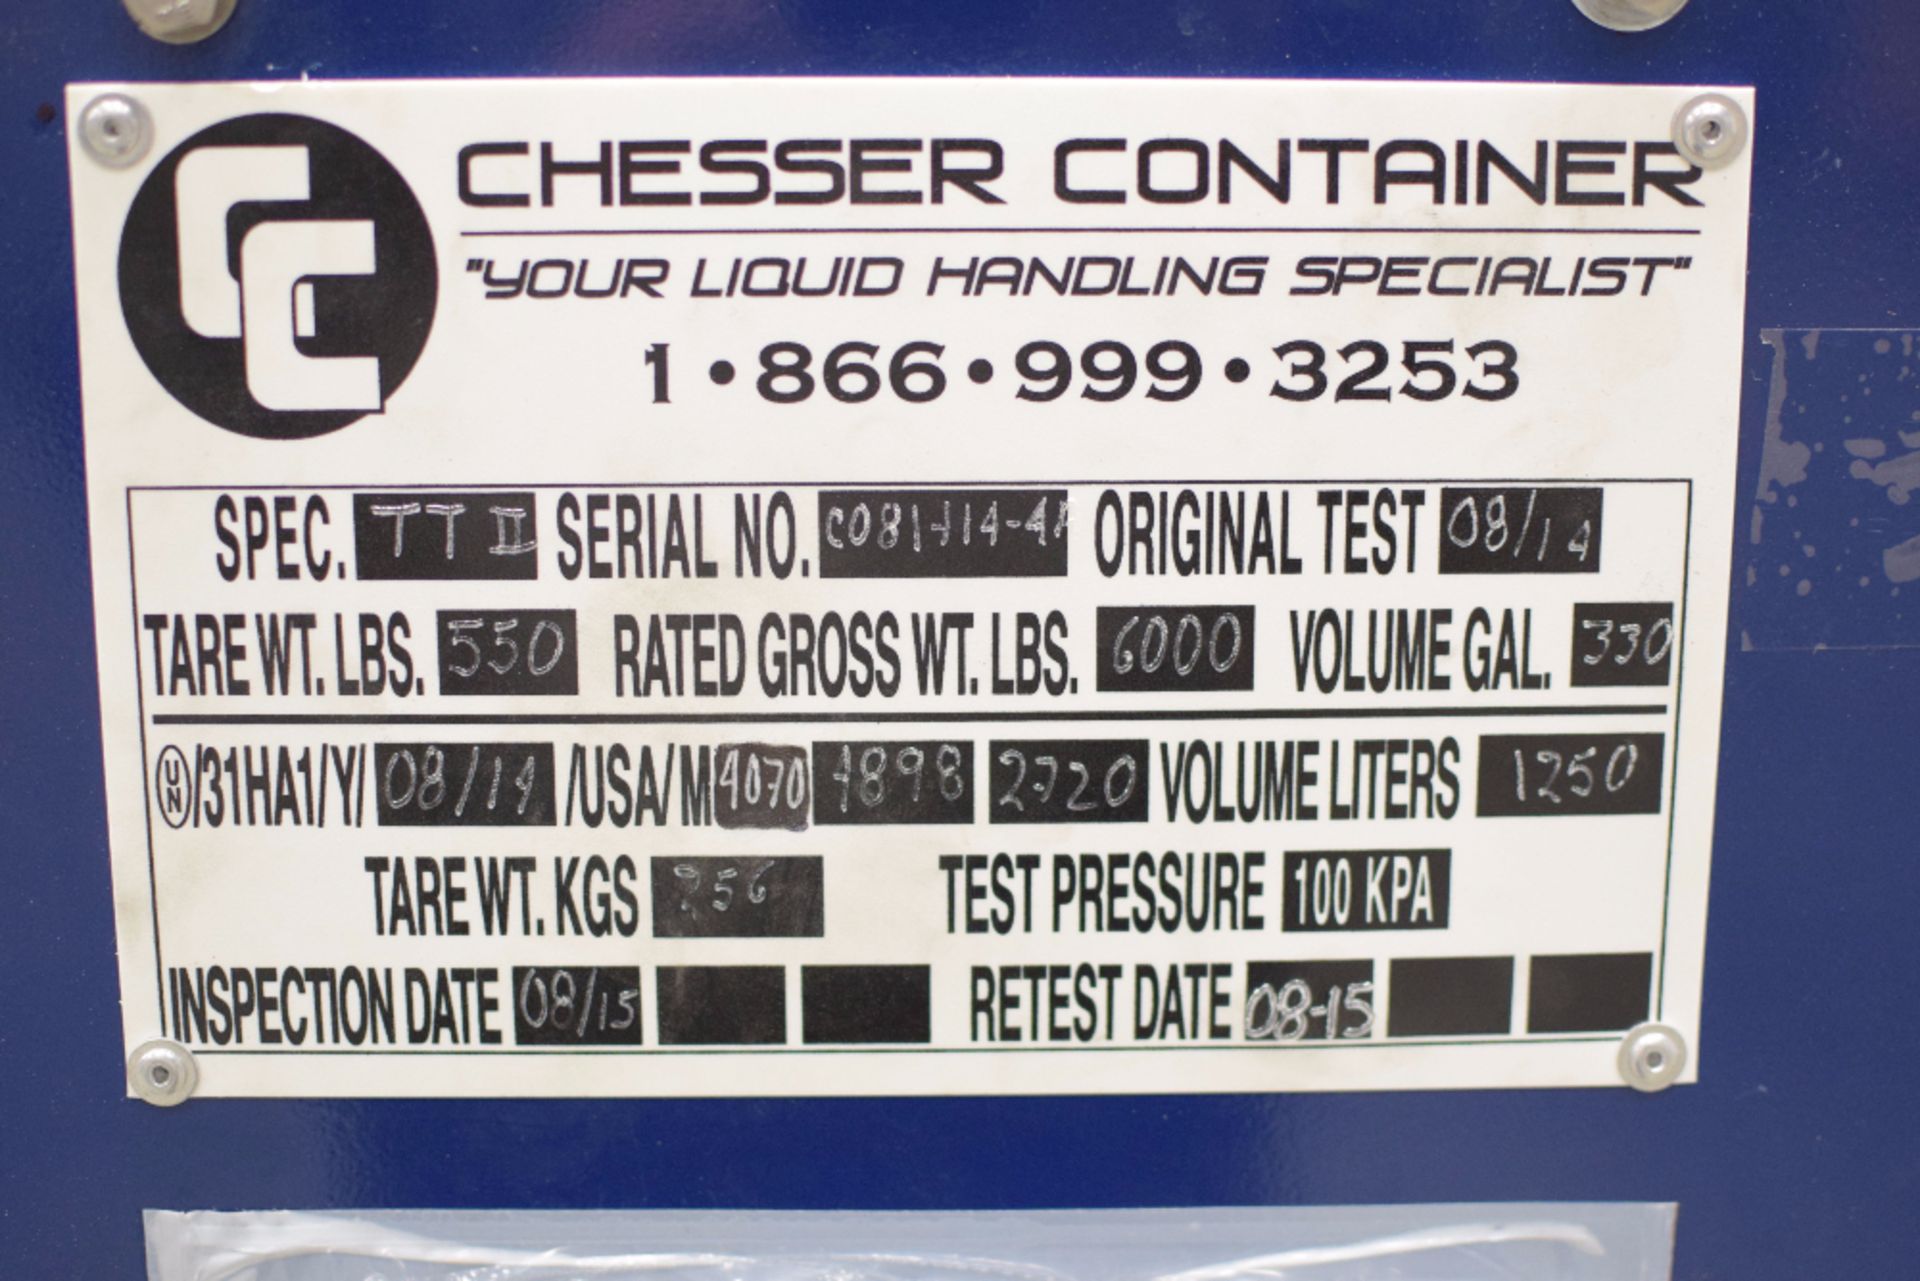 Chesser Container 330 Gallon Waste Tote - Image 2 of 2